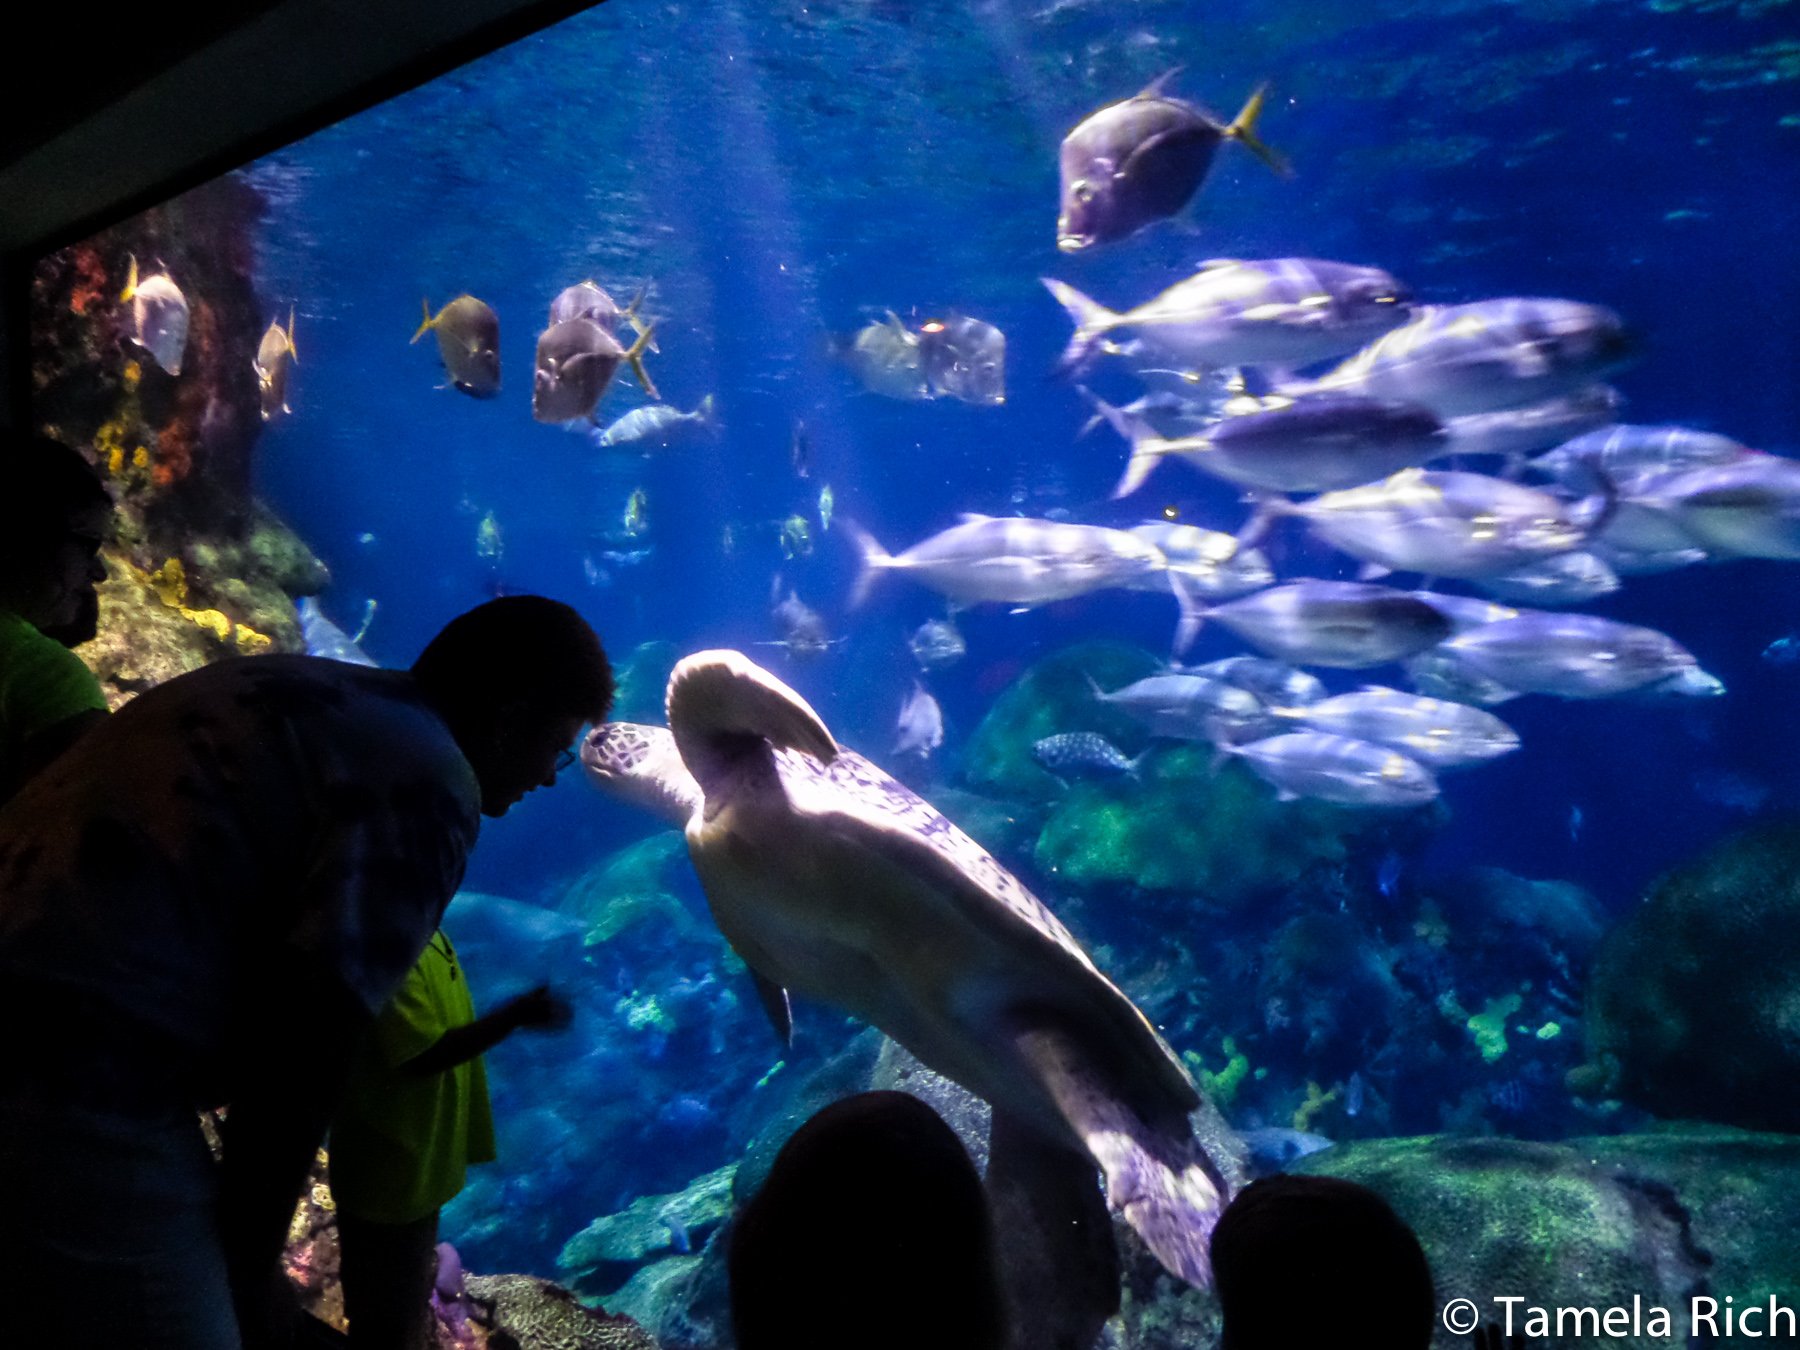 The TN Aquarium is a great family attraction